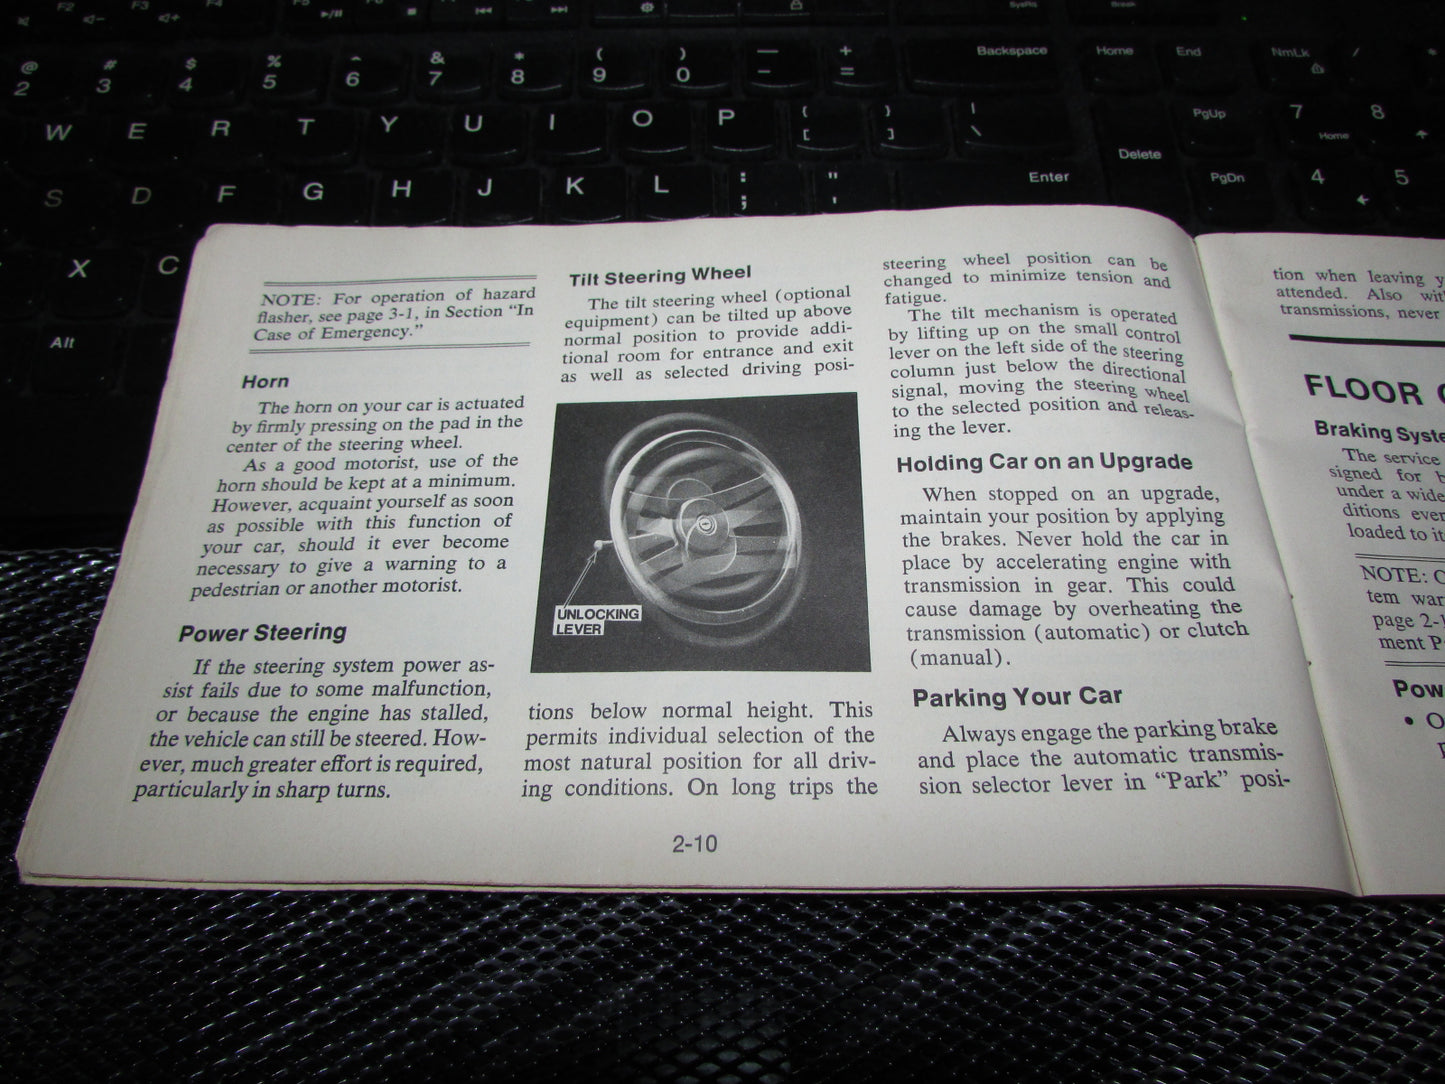 Chevrolet Monza (1977) Owners Manual